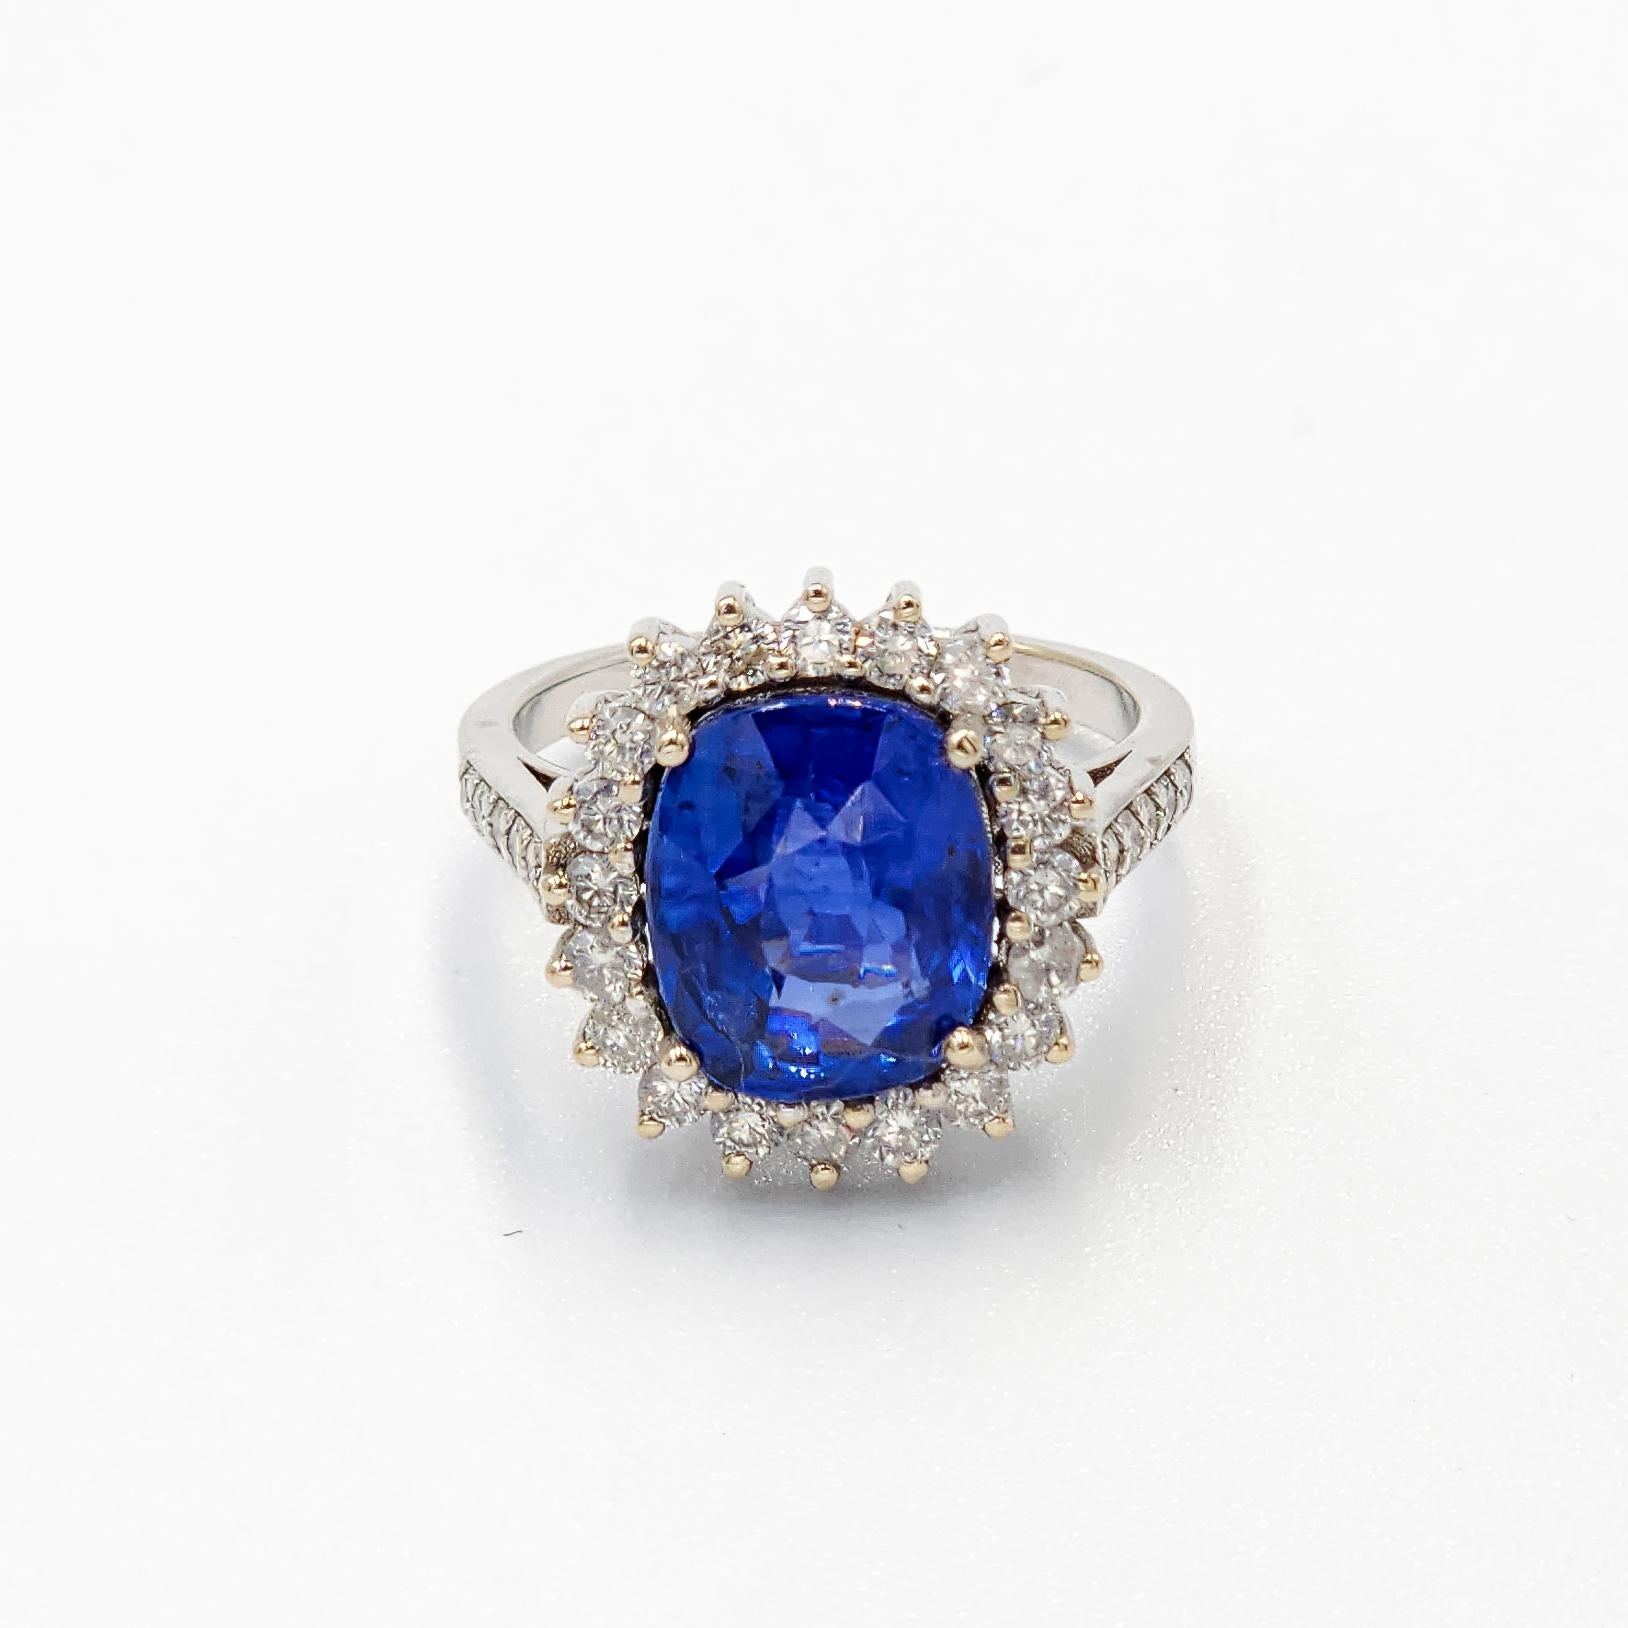 This is a beautiful GIA certified Velvet Blue Sapphire Ring with diamonds and 18k gold. It is a beautiful and amazing piece with velvet Blue color, set in a custom designed ring to enhance its natural beauty!
Blue Sapphire : 5.18 carats
Certificate: